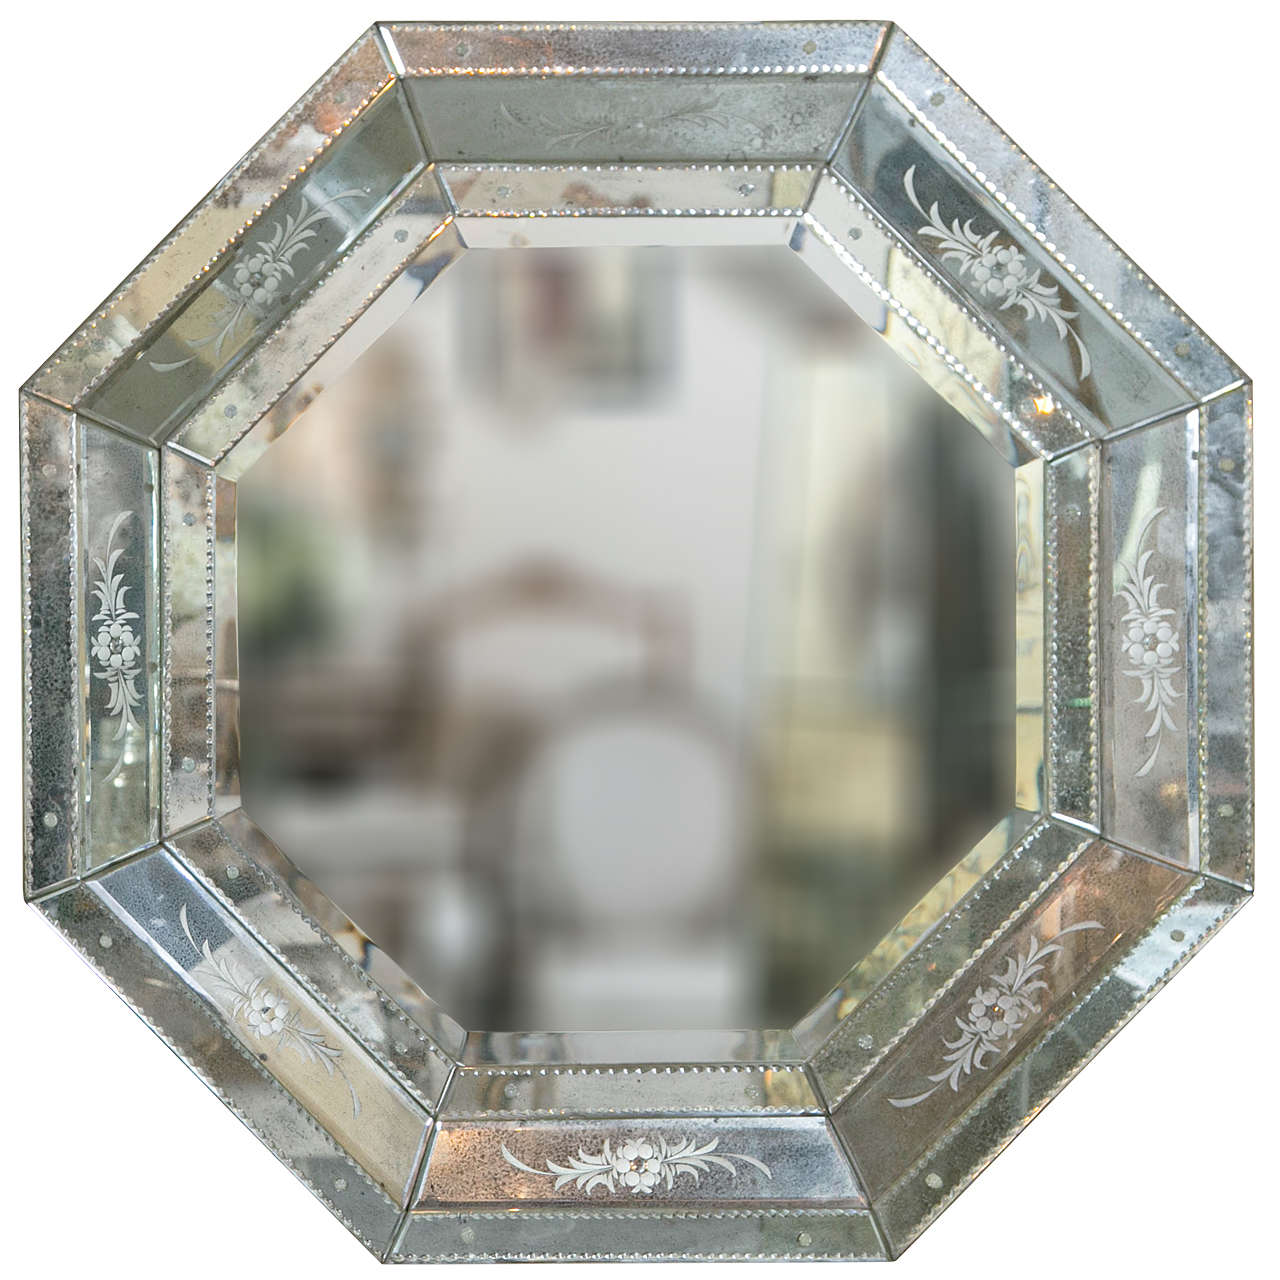 Venetian style Hollywood Regency octagon mirror. These beautifully etched glass antiqued framed mirrors having several outer design frames over a central octagonal beveled mirror. The back supported with wood and heavy metal hanging supports.